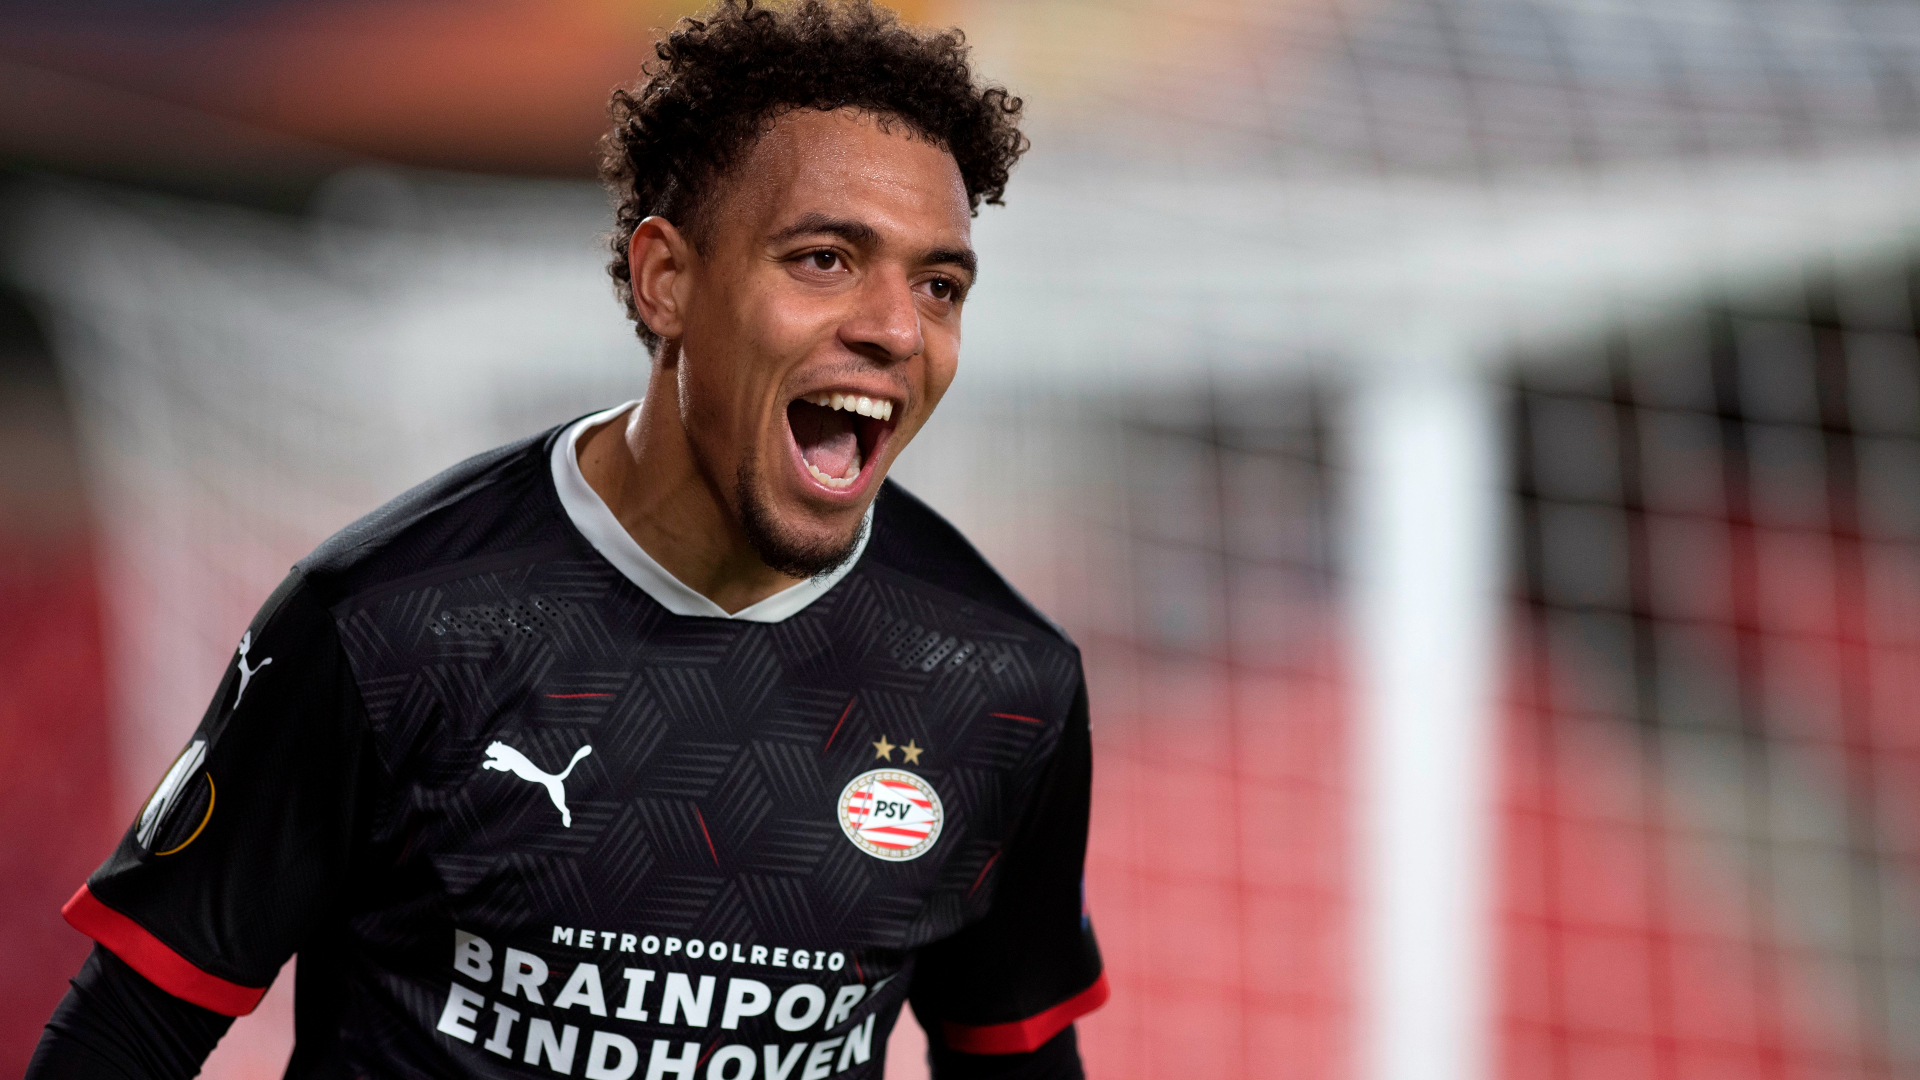 Dortmund confirm Malen signing from PSV following Sancho departure and amid Haaland speculation